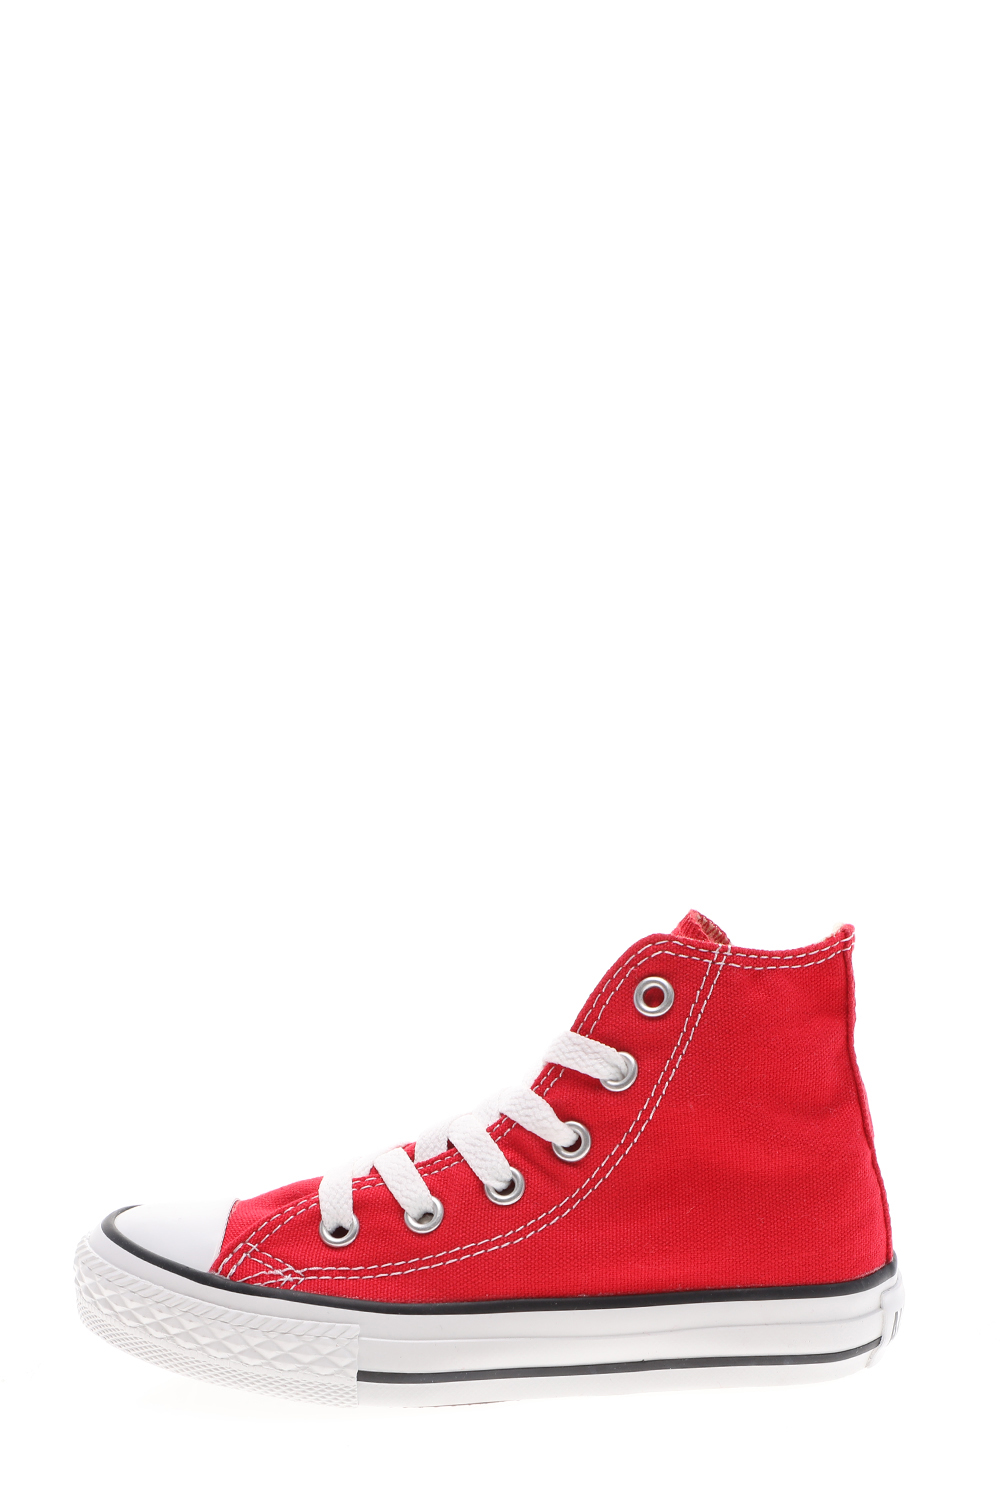 CONVERSE – Παιδικα sneakers Chuck Taylor AS Core HI κοκκινα